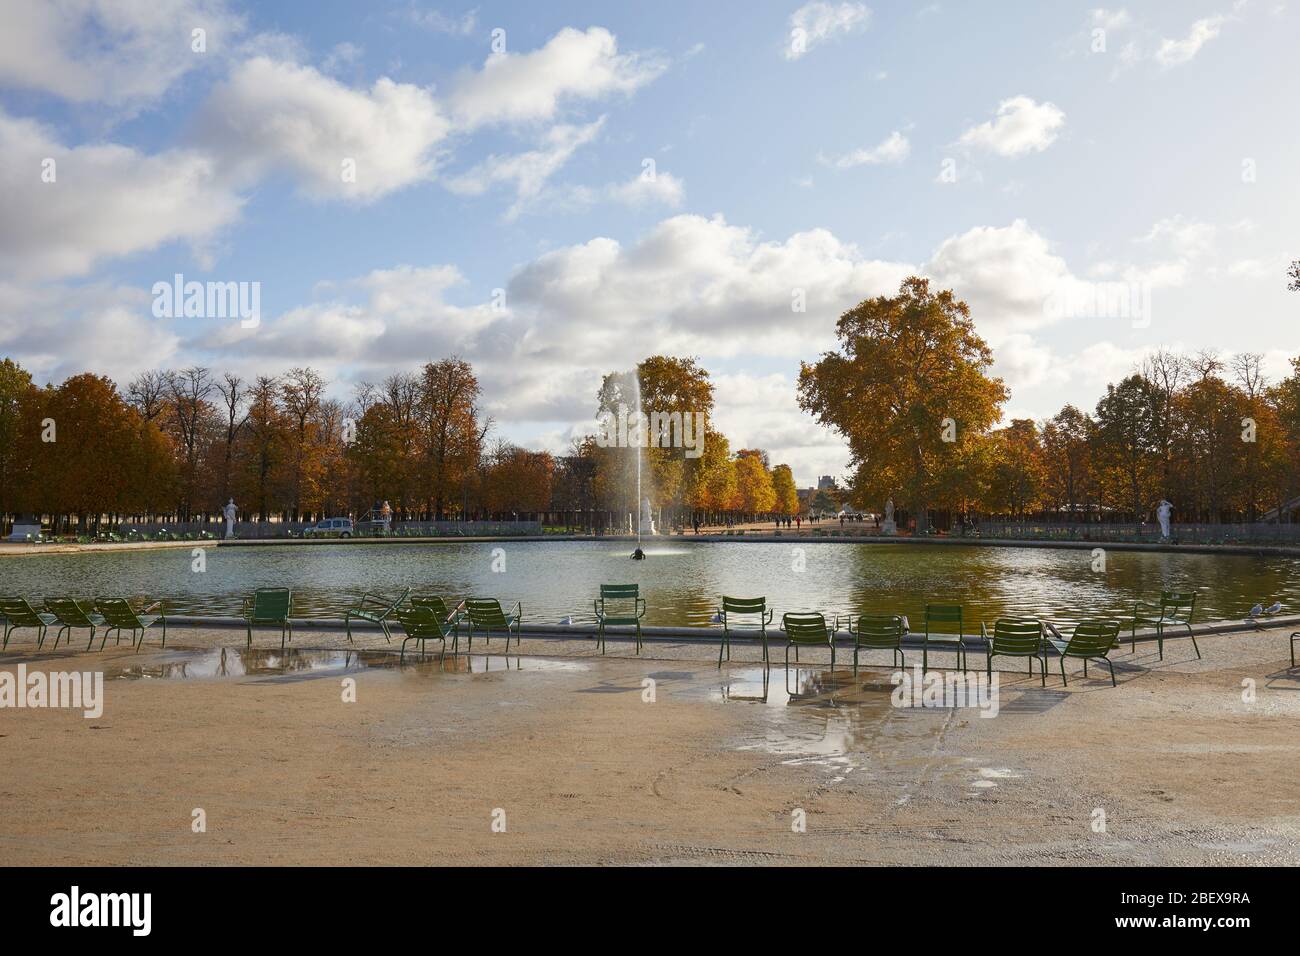 PARIS - NOVEMBER 7, 2019: Tuileries garden with chairs and fountain in sunny autumn in Paris Stock Photo